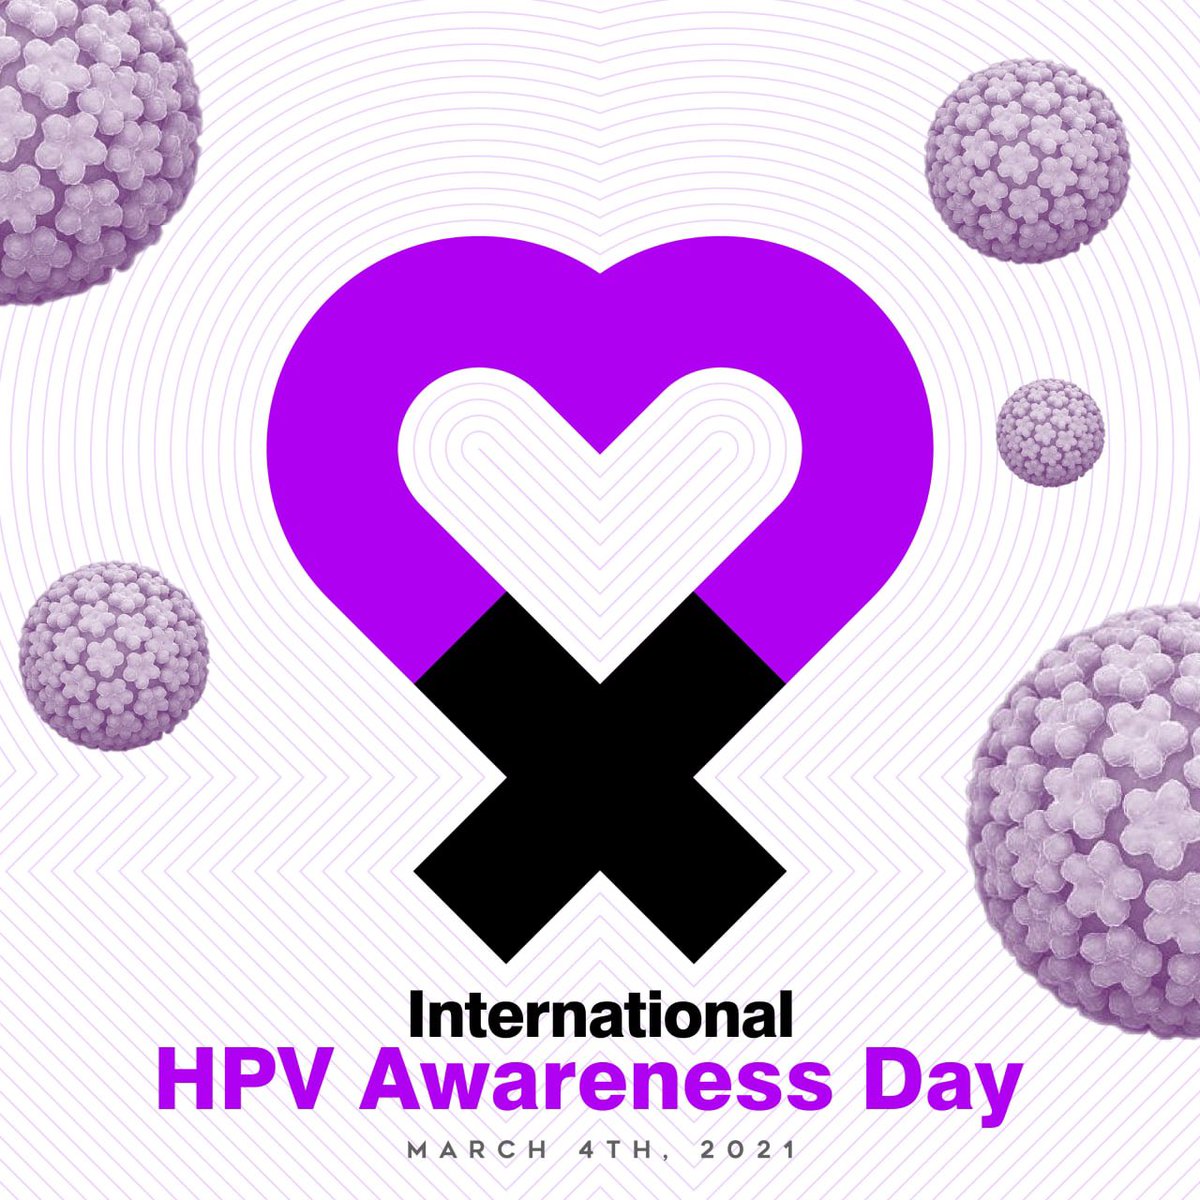 Happy International HPV day!
Let this day serve as a reminder to everyone about the cause and effect of Human Papilloma Virus.

Stay safe everyone!
-
#InternationalHPVDay #HumanPapillomaVirus #HPV #wesellsextoys #wesellsextoysforcouples